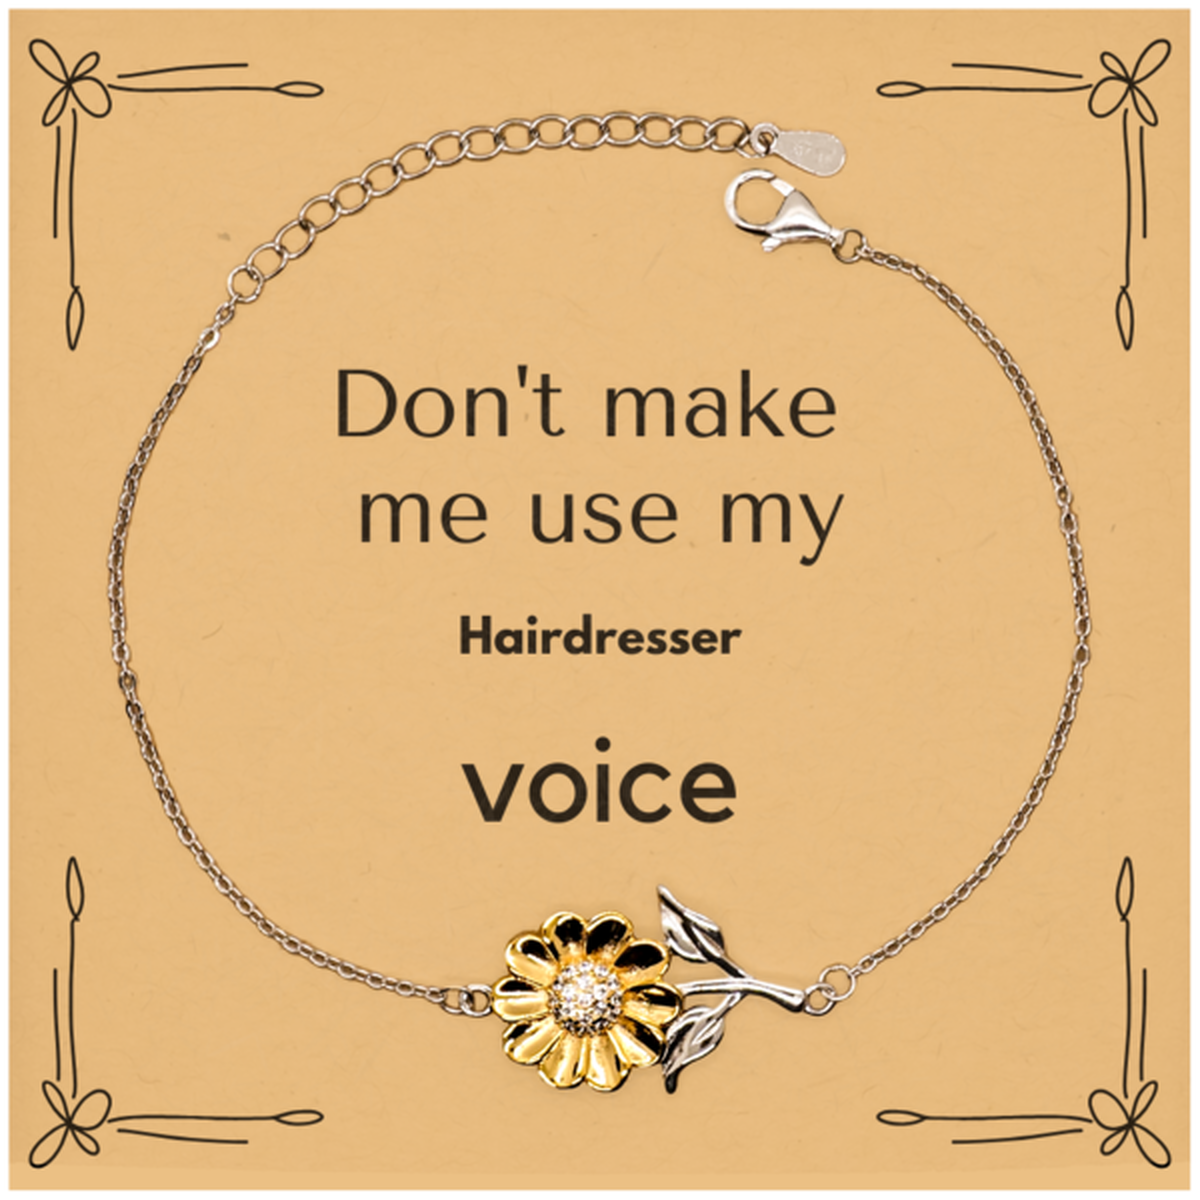 Don't make me use my Hairdresser voice, Sarcasm Hairdresser Card Gifts, Christmas Hairdresser Sunflower Bracelet Birthday Unique Gifts For Hairdresser Coworkers, Men, Women, Colleague, Friends